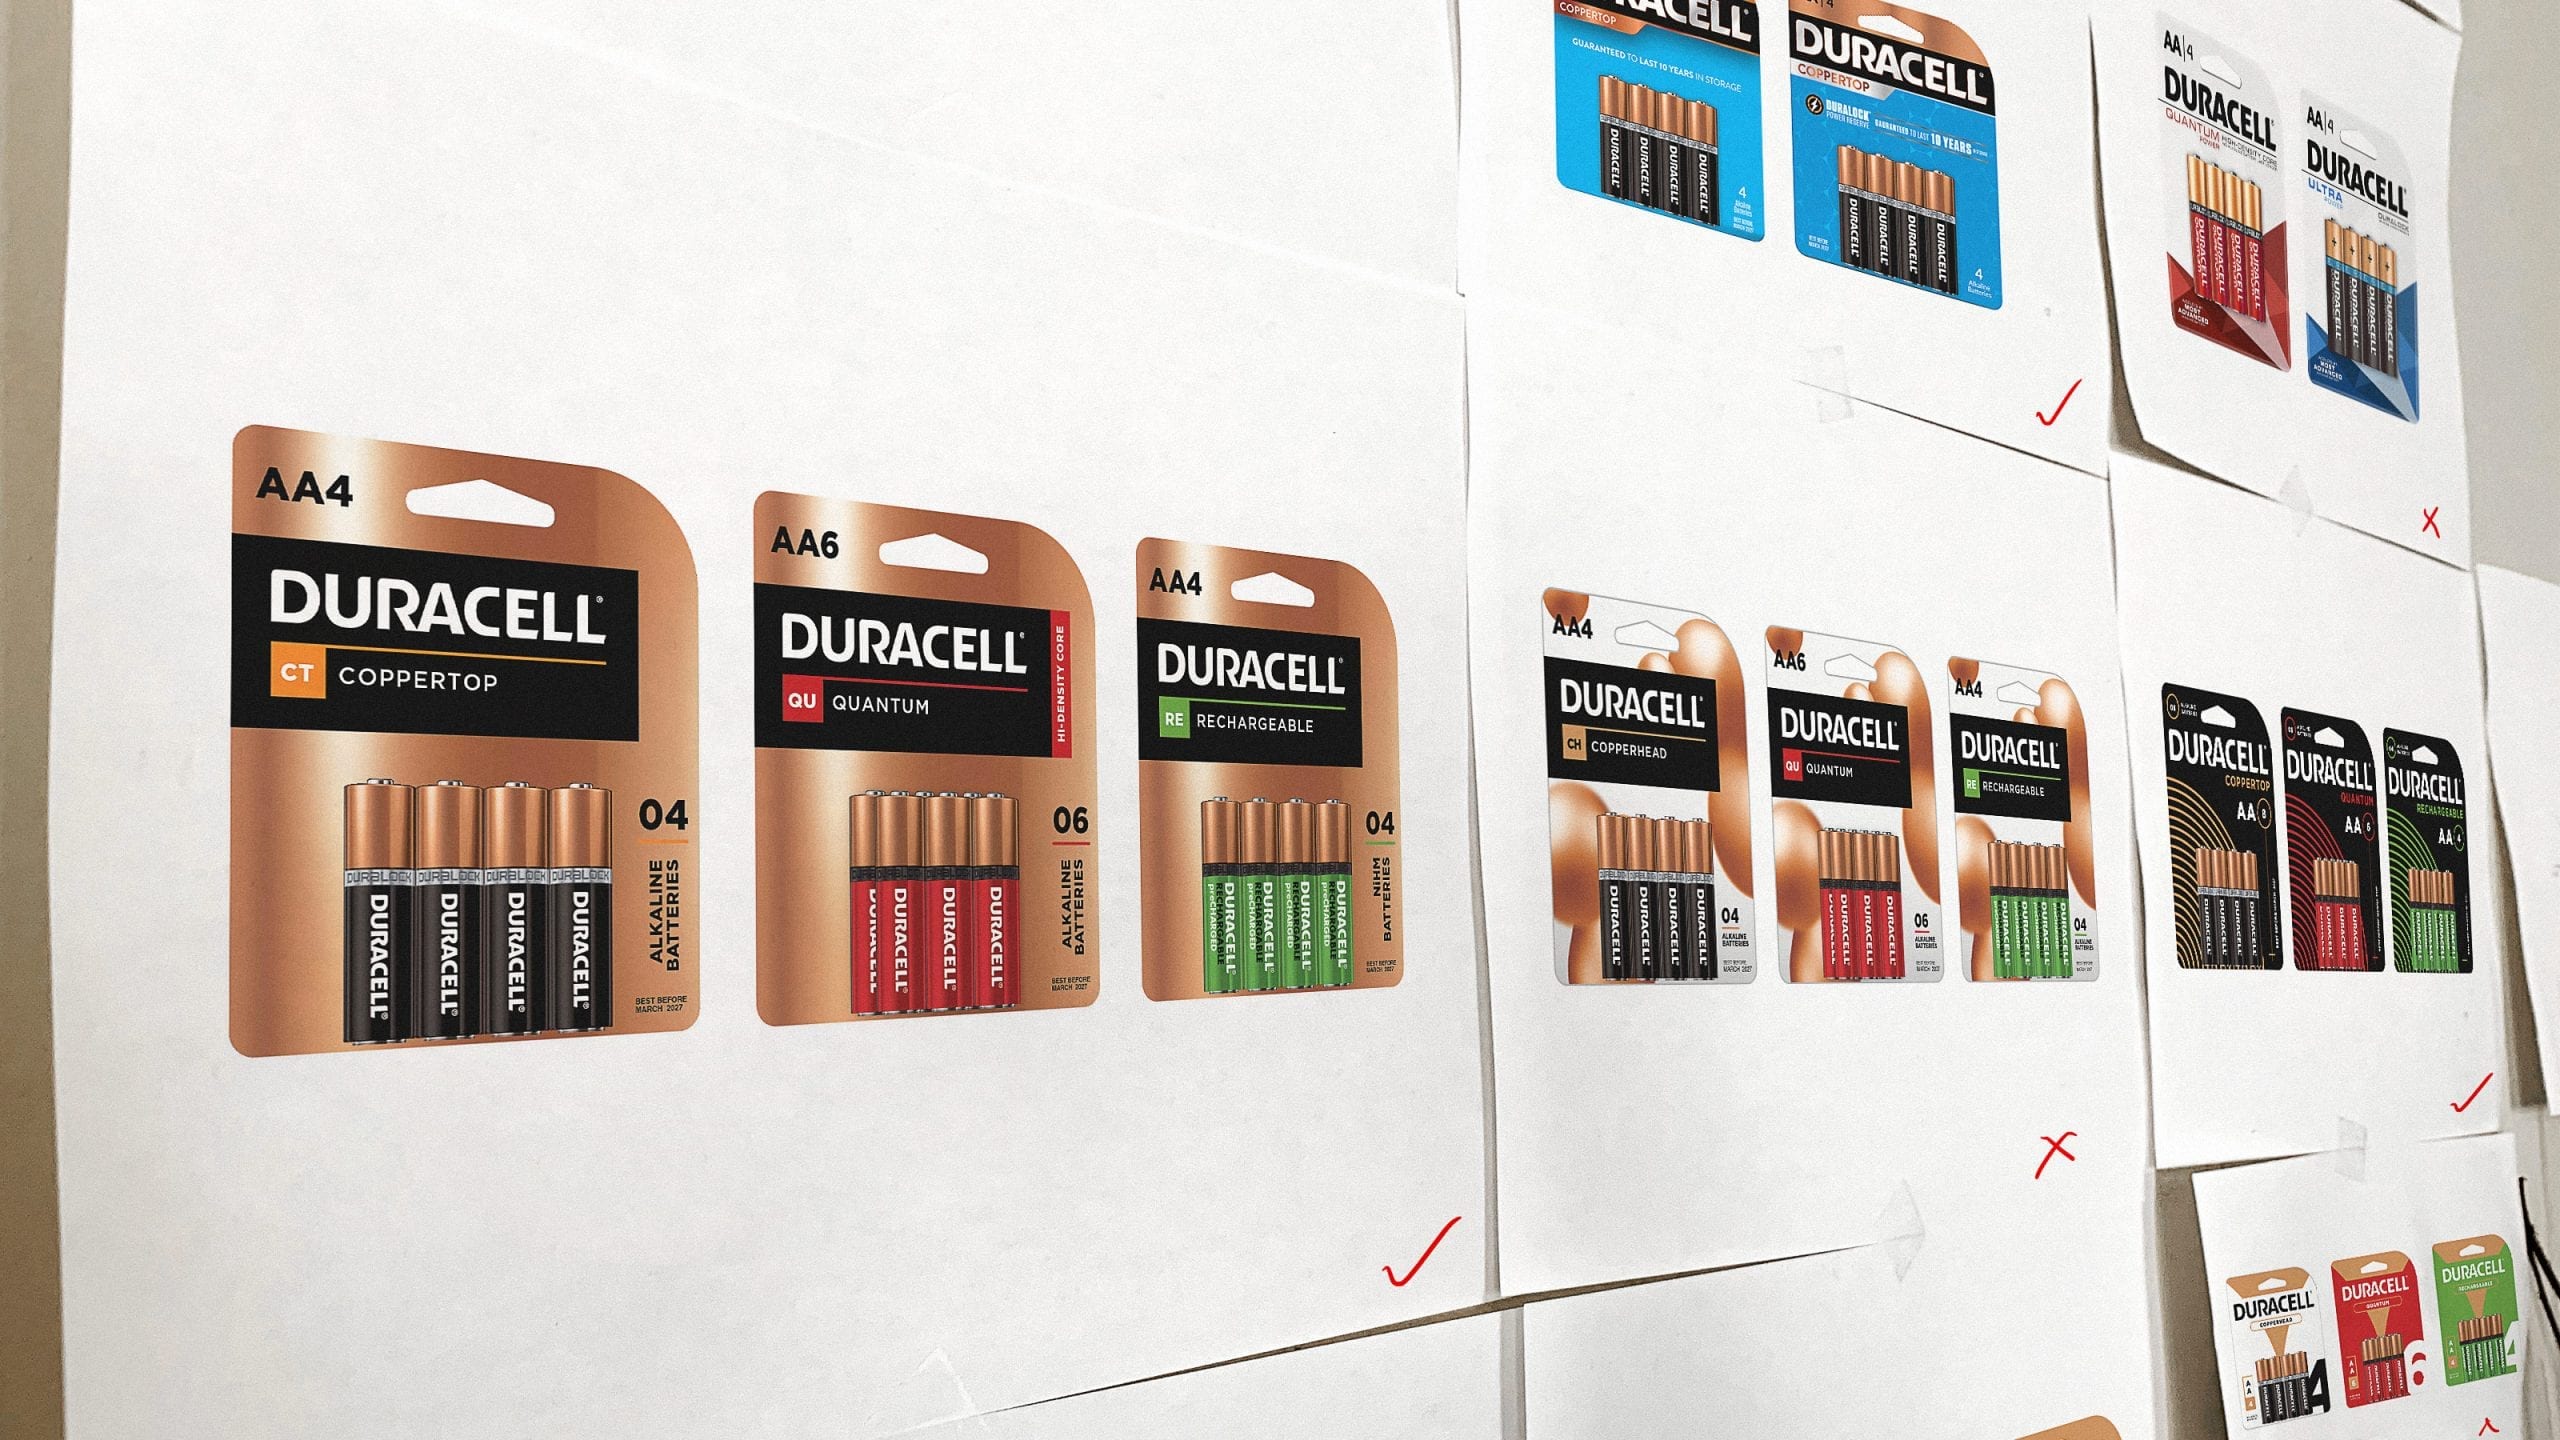 Duracell package design company